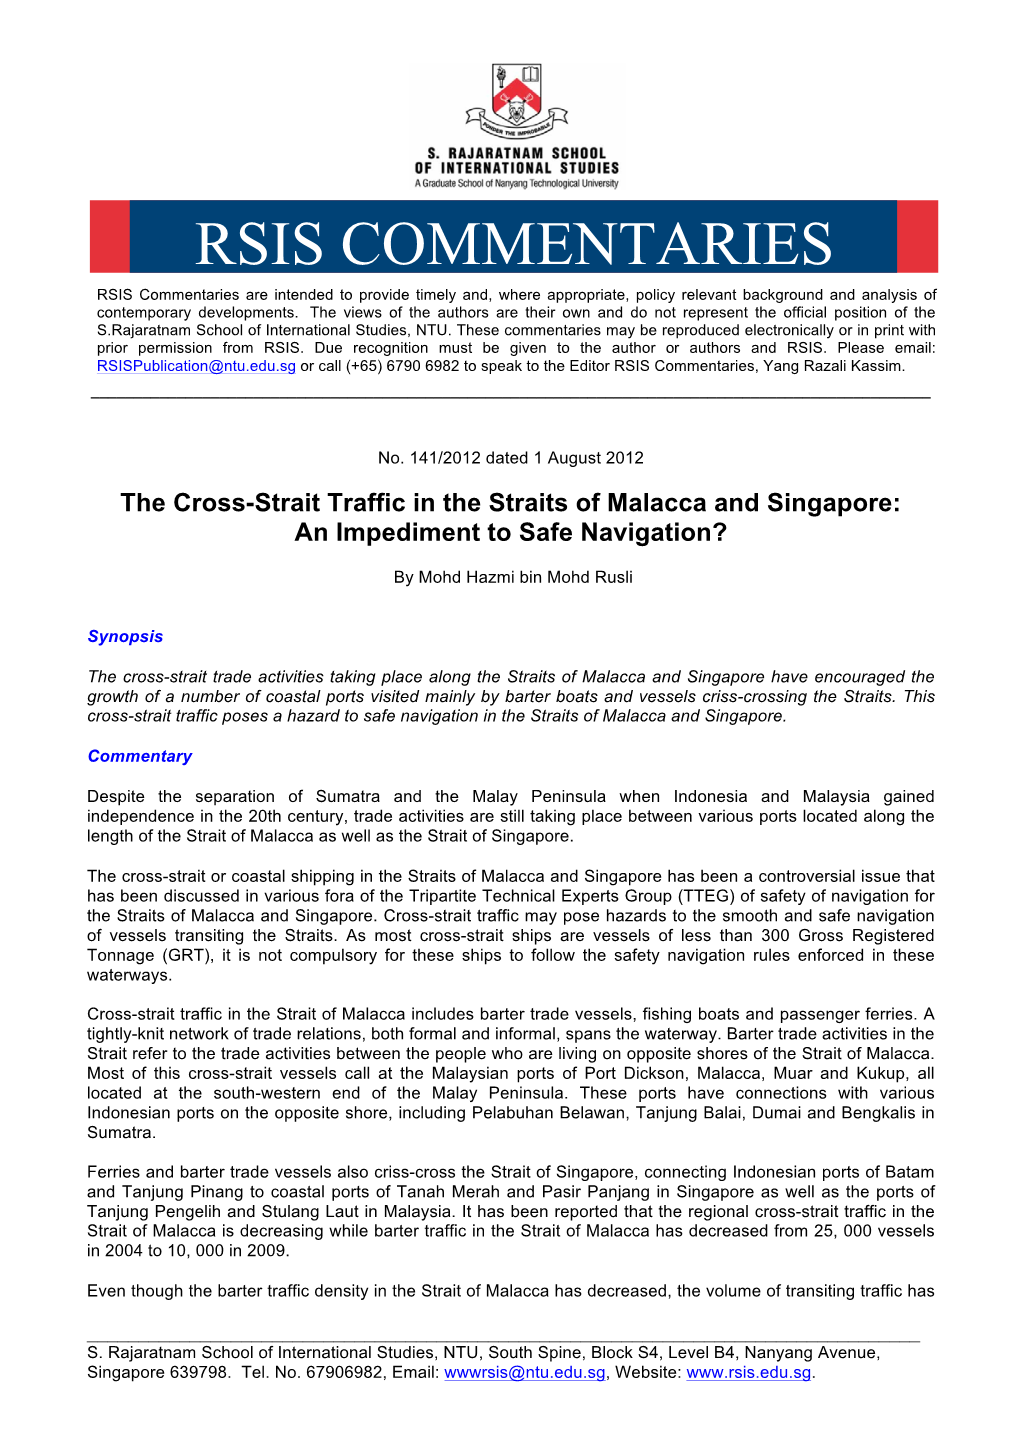 The Cross-Strait Traffic in the Straits of Malacca and Singapore: an Impediment to Safe Navigation?